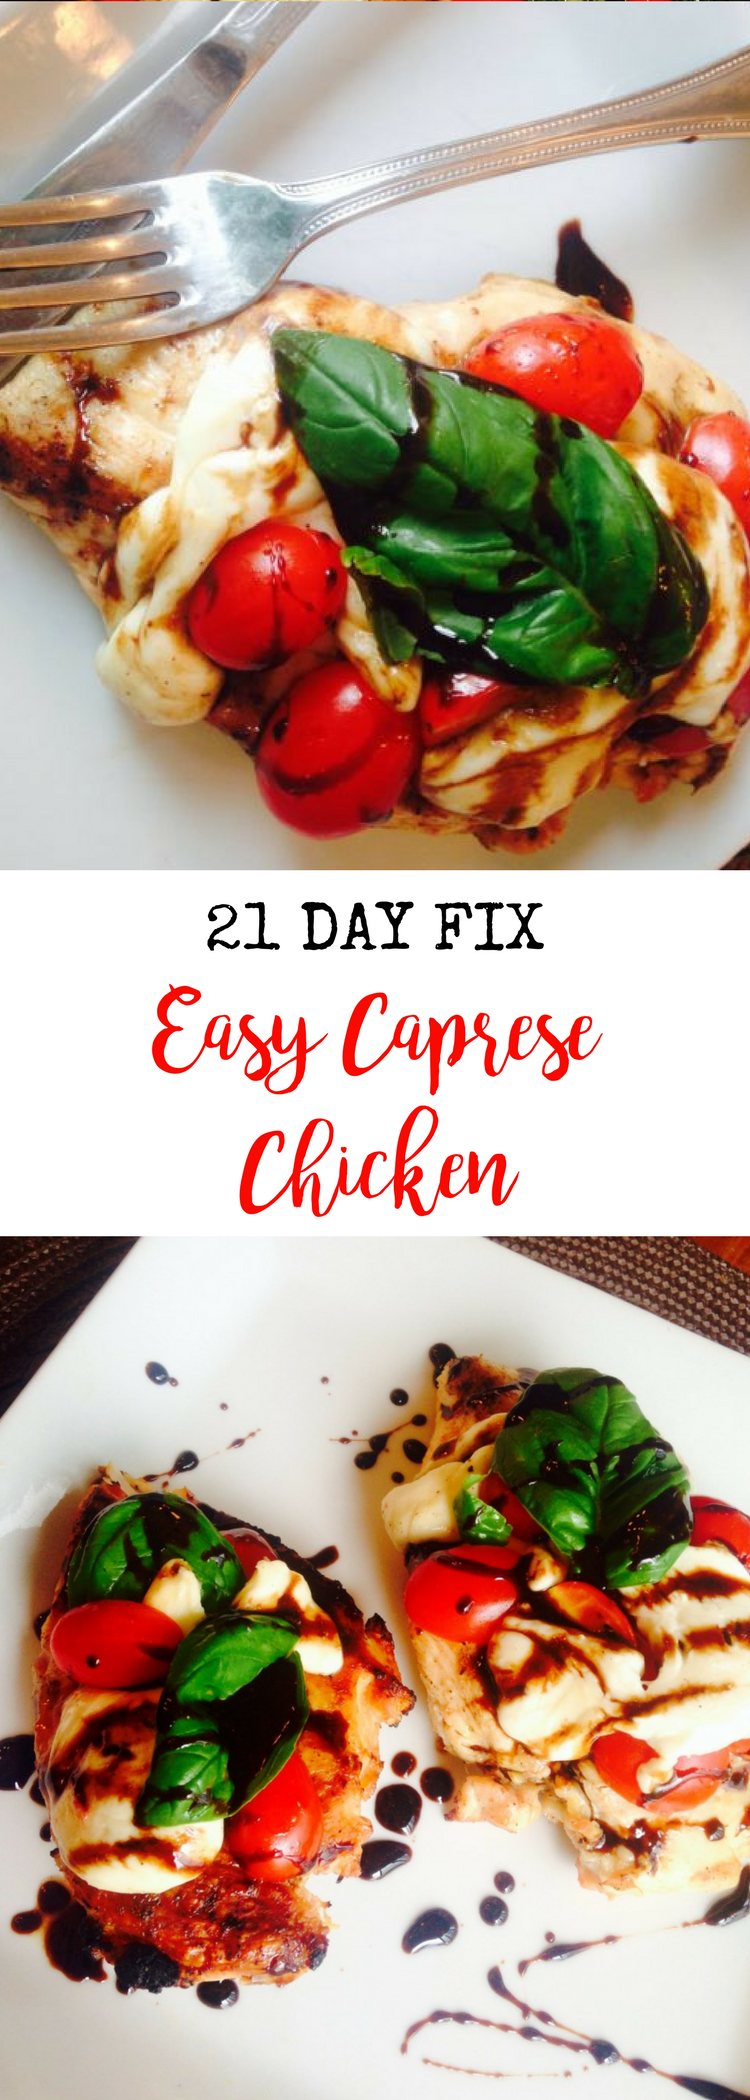 21 Day Fix Easy Caprese Chicken | Confessions of a Fit Foodie